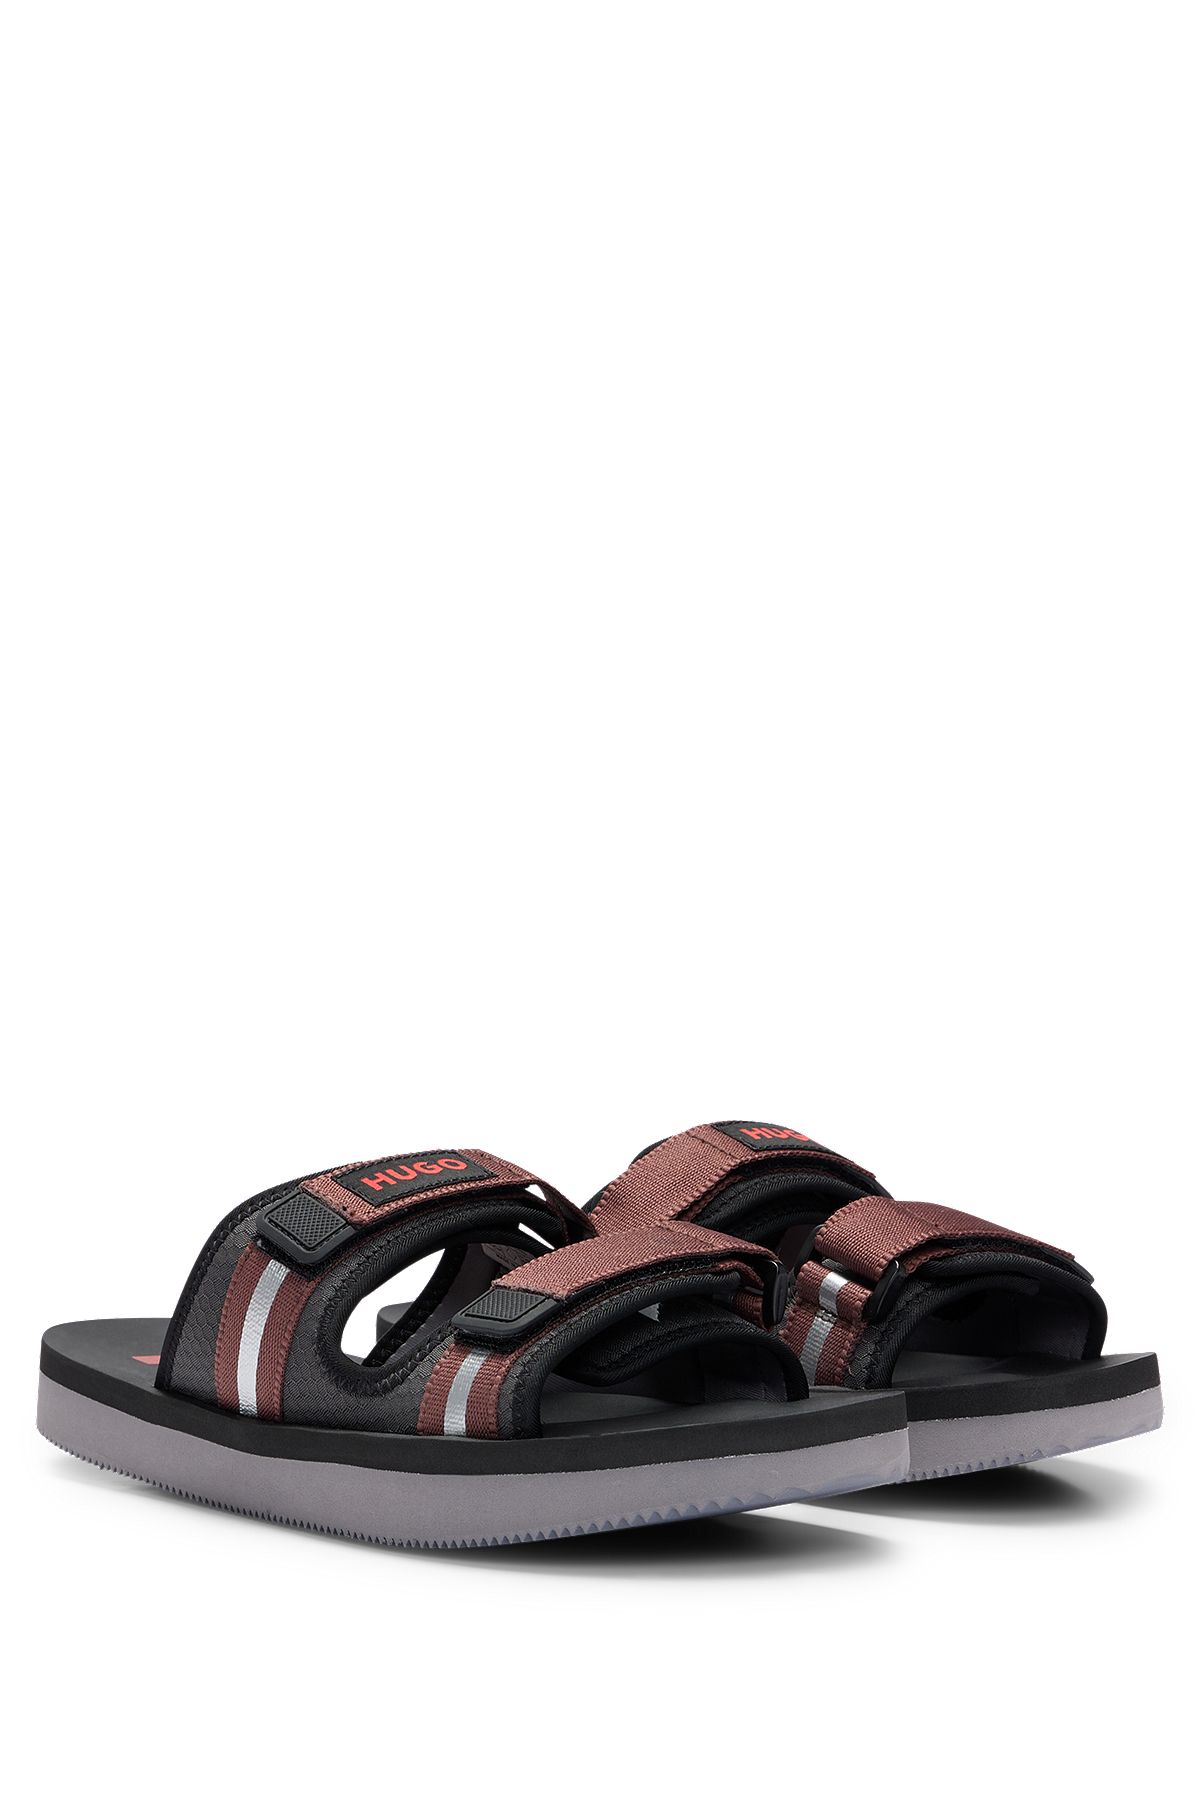 Logo sandals with twin touch-closure straps, Light Grey